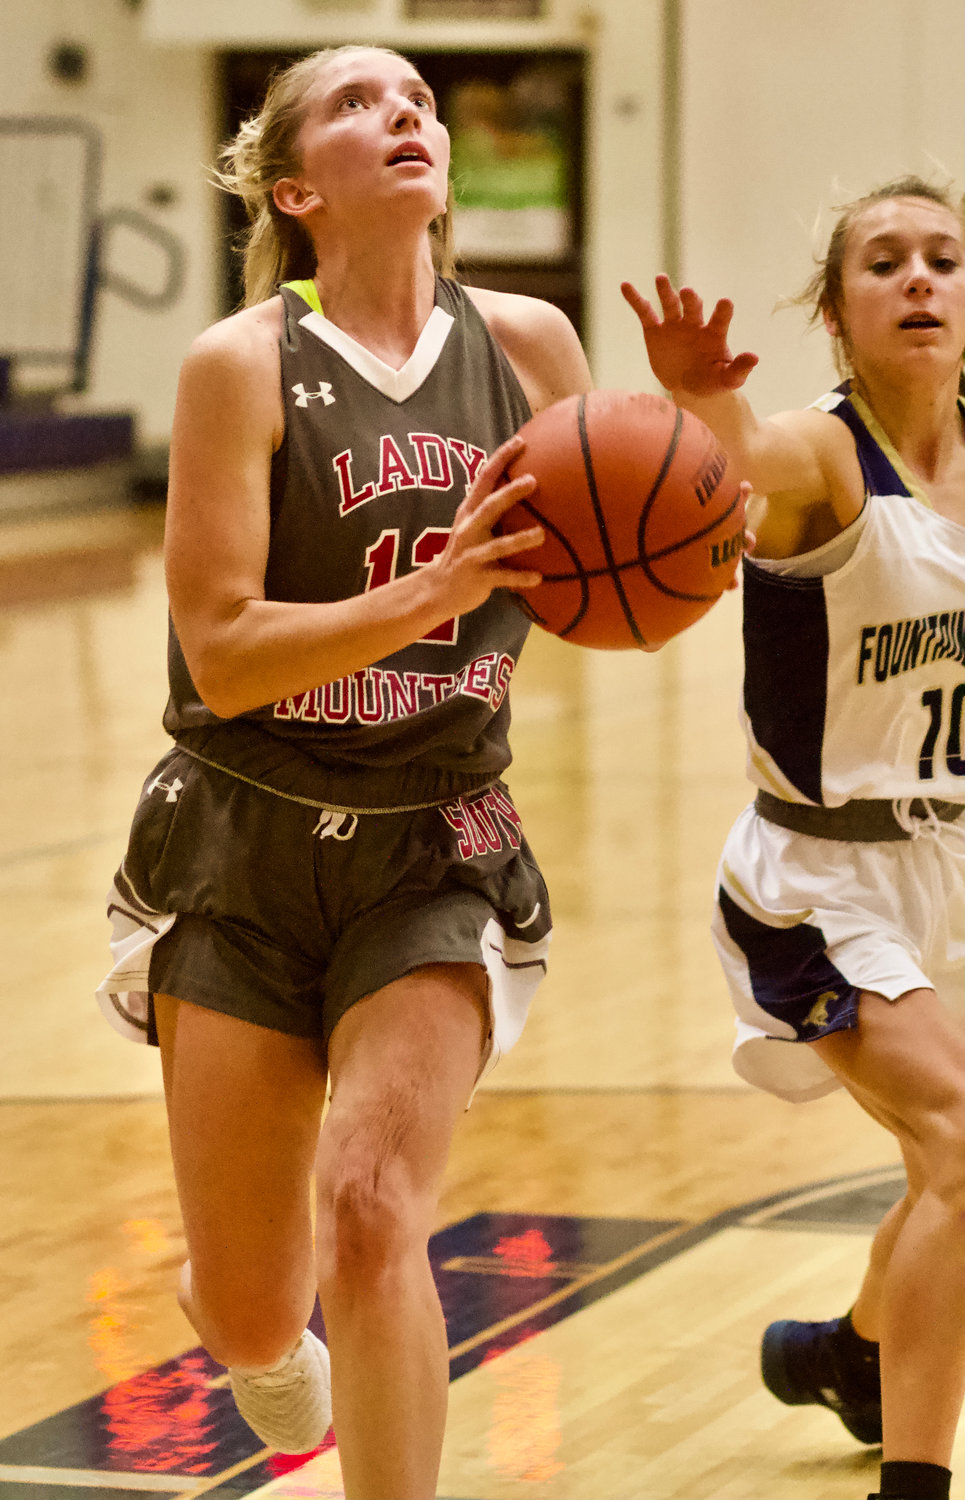 Dori Frederick was the second-leading scorer for the Mounties with 8 points.